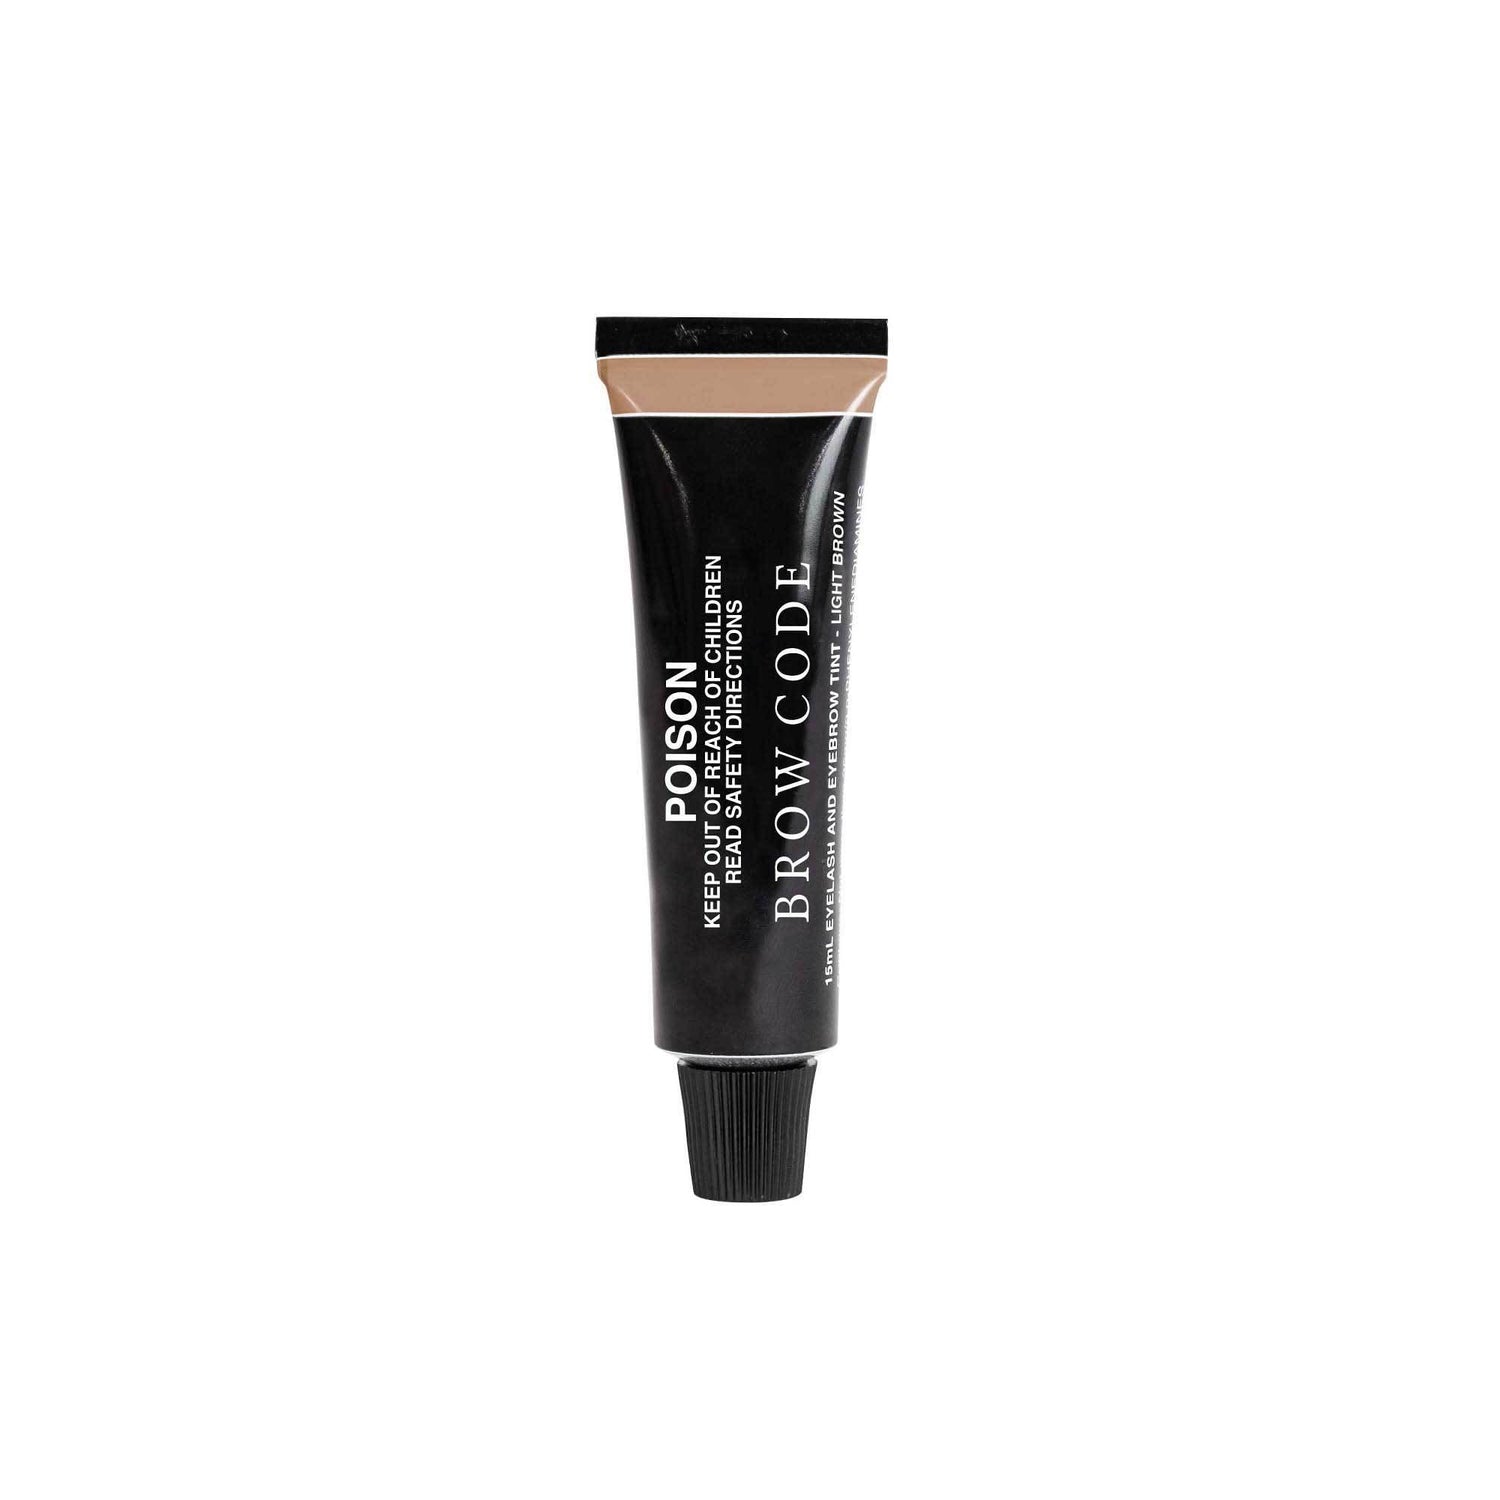 All Brow Code Product Excl Tinted Multi-Peptide